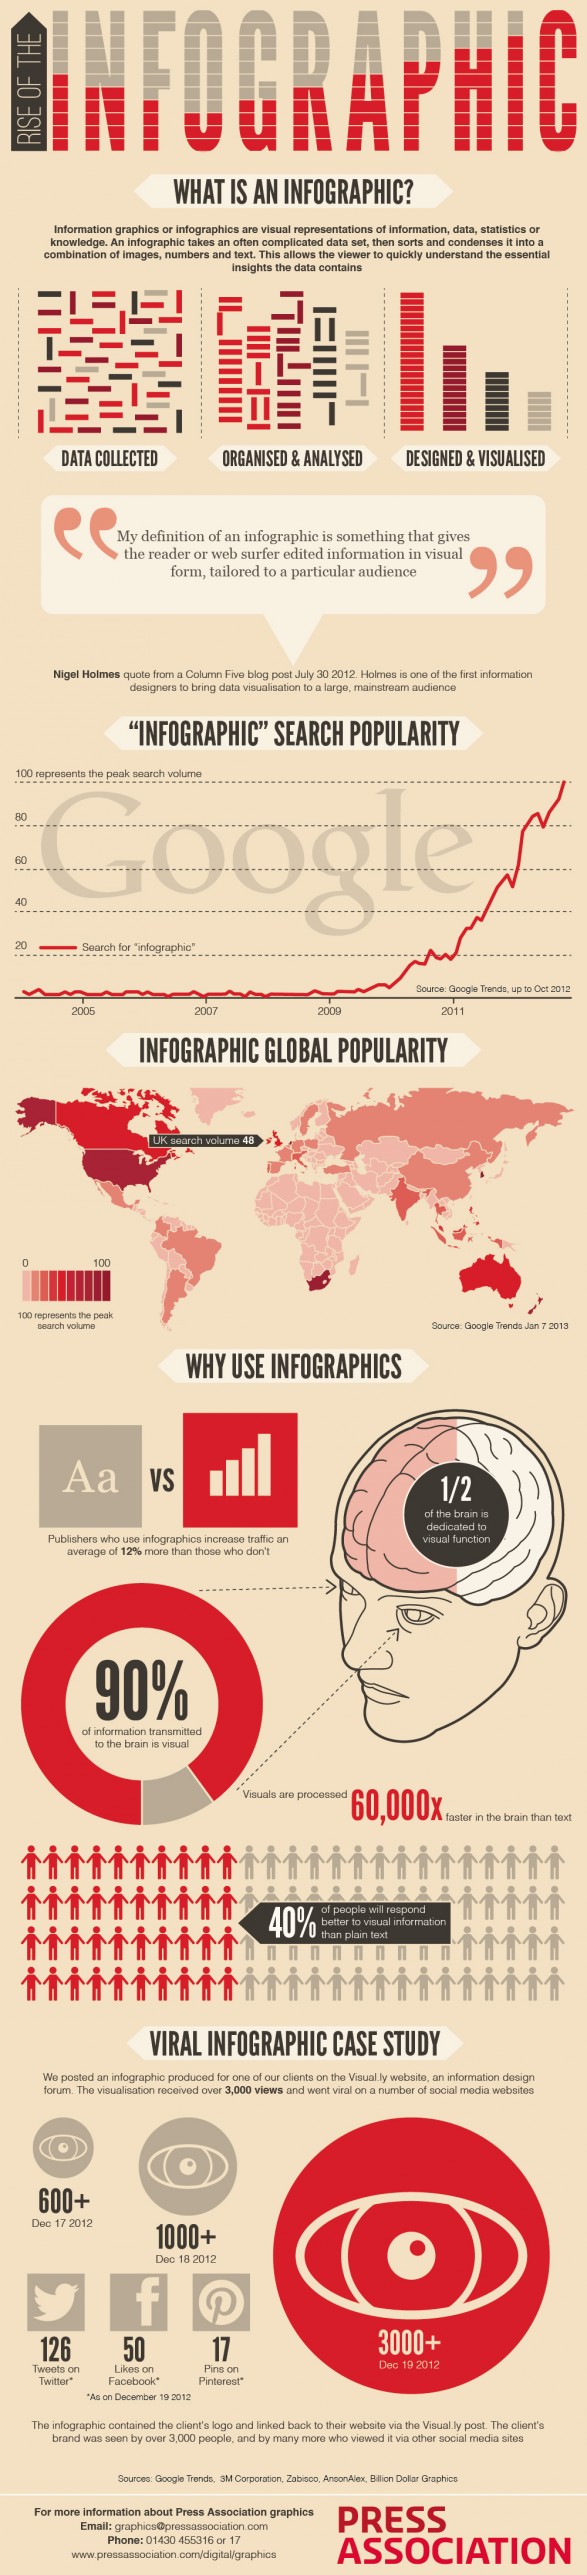 Press Association's infographic about good infographics.